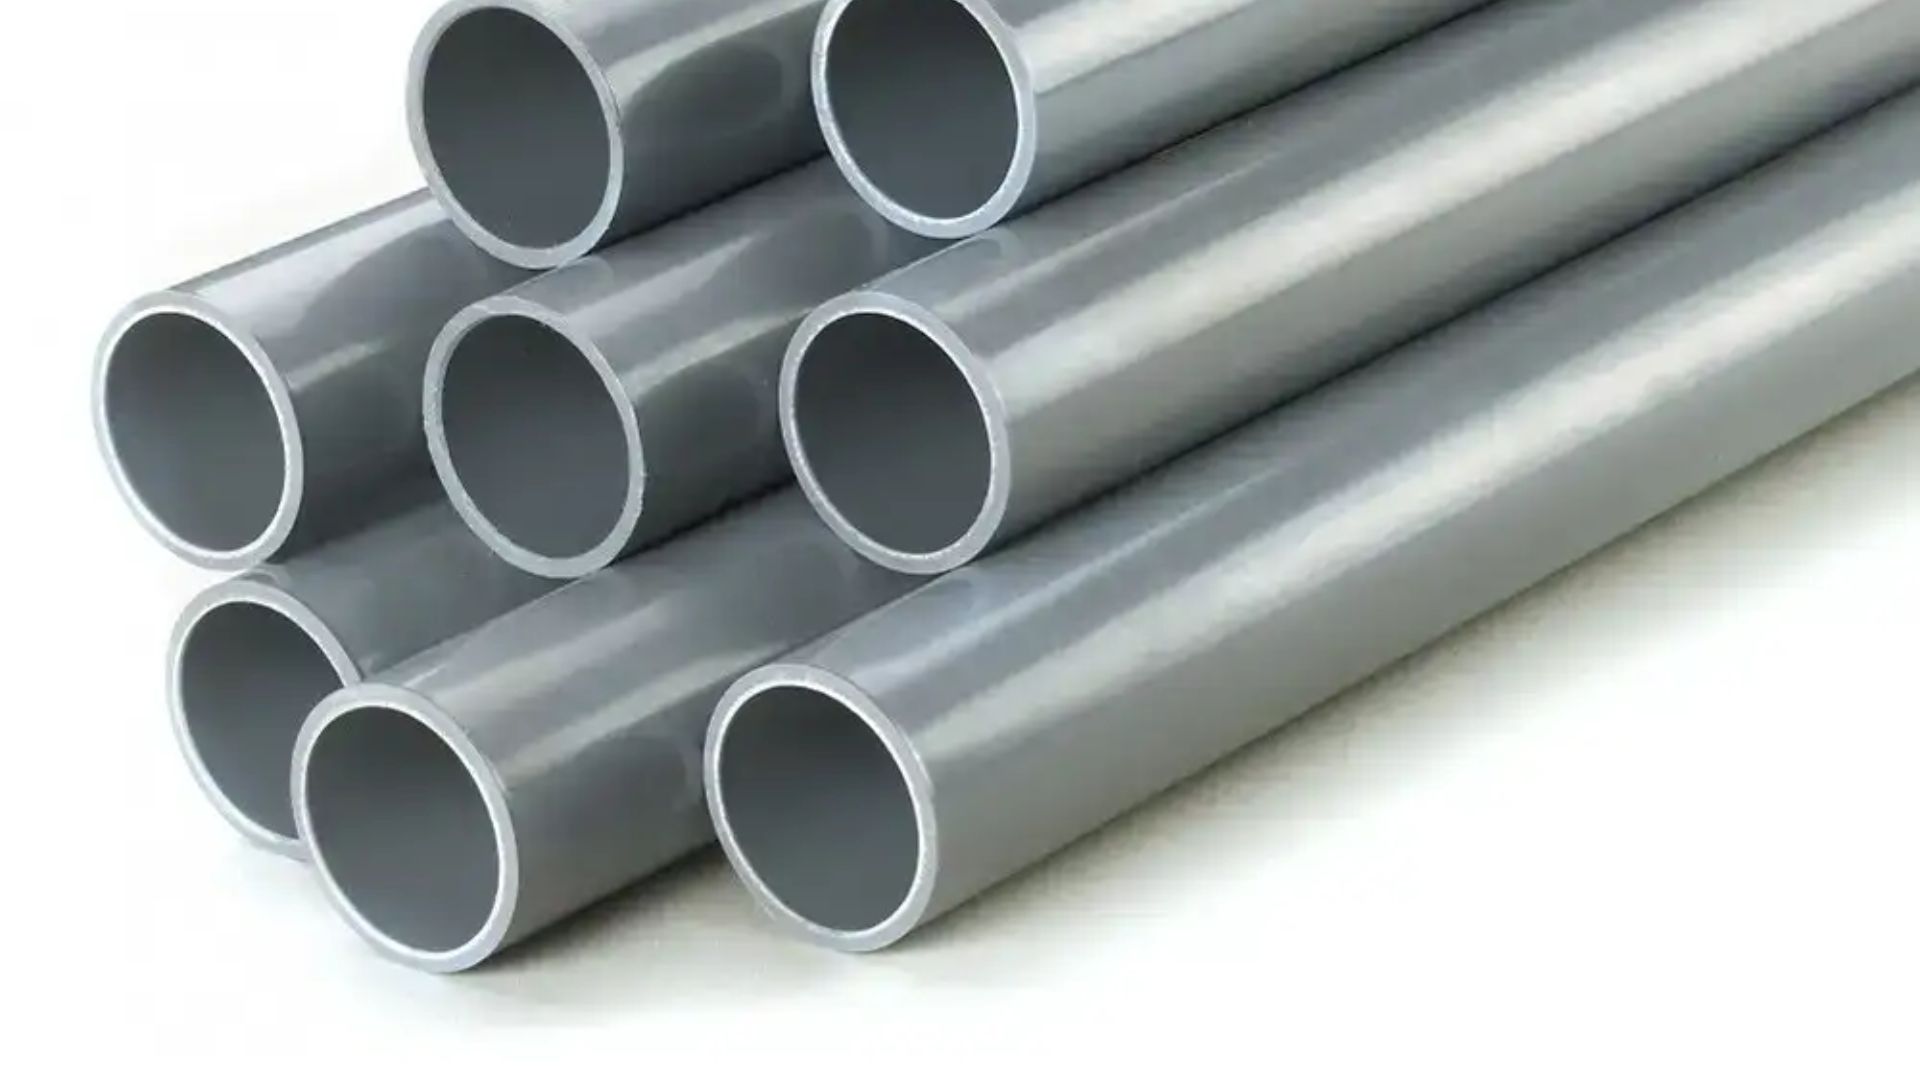 Top 5 Factors to Consider When Selecting a Decoduct Pipe Dealer